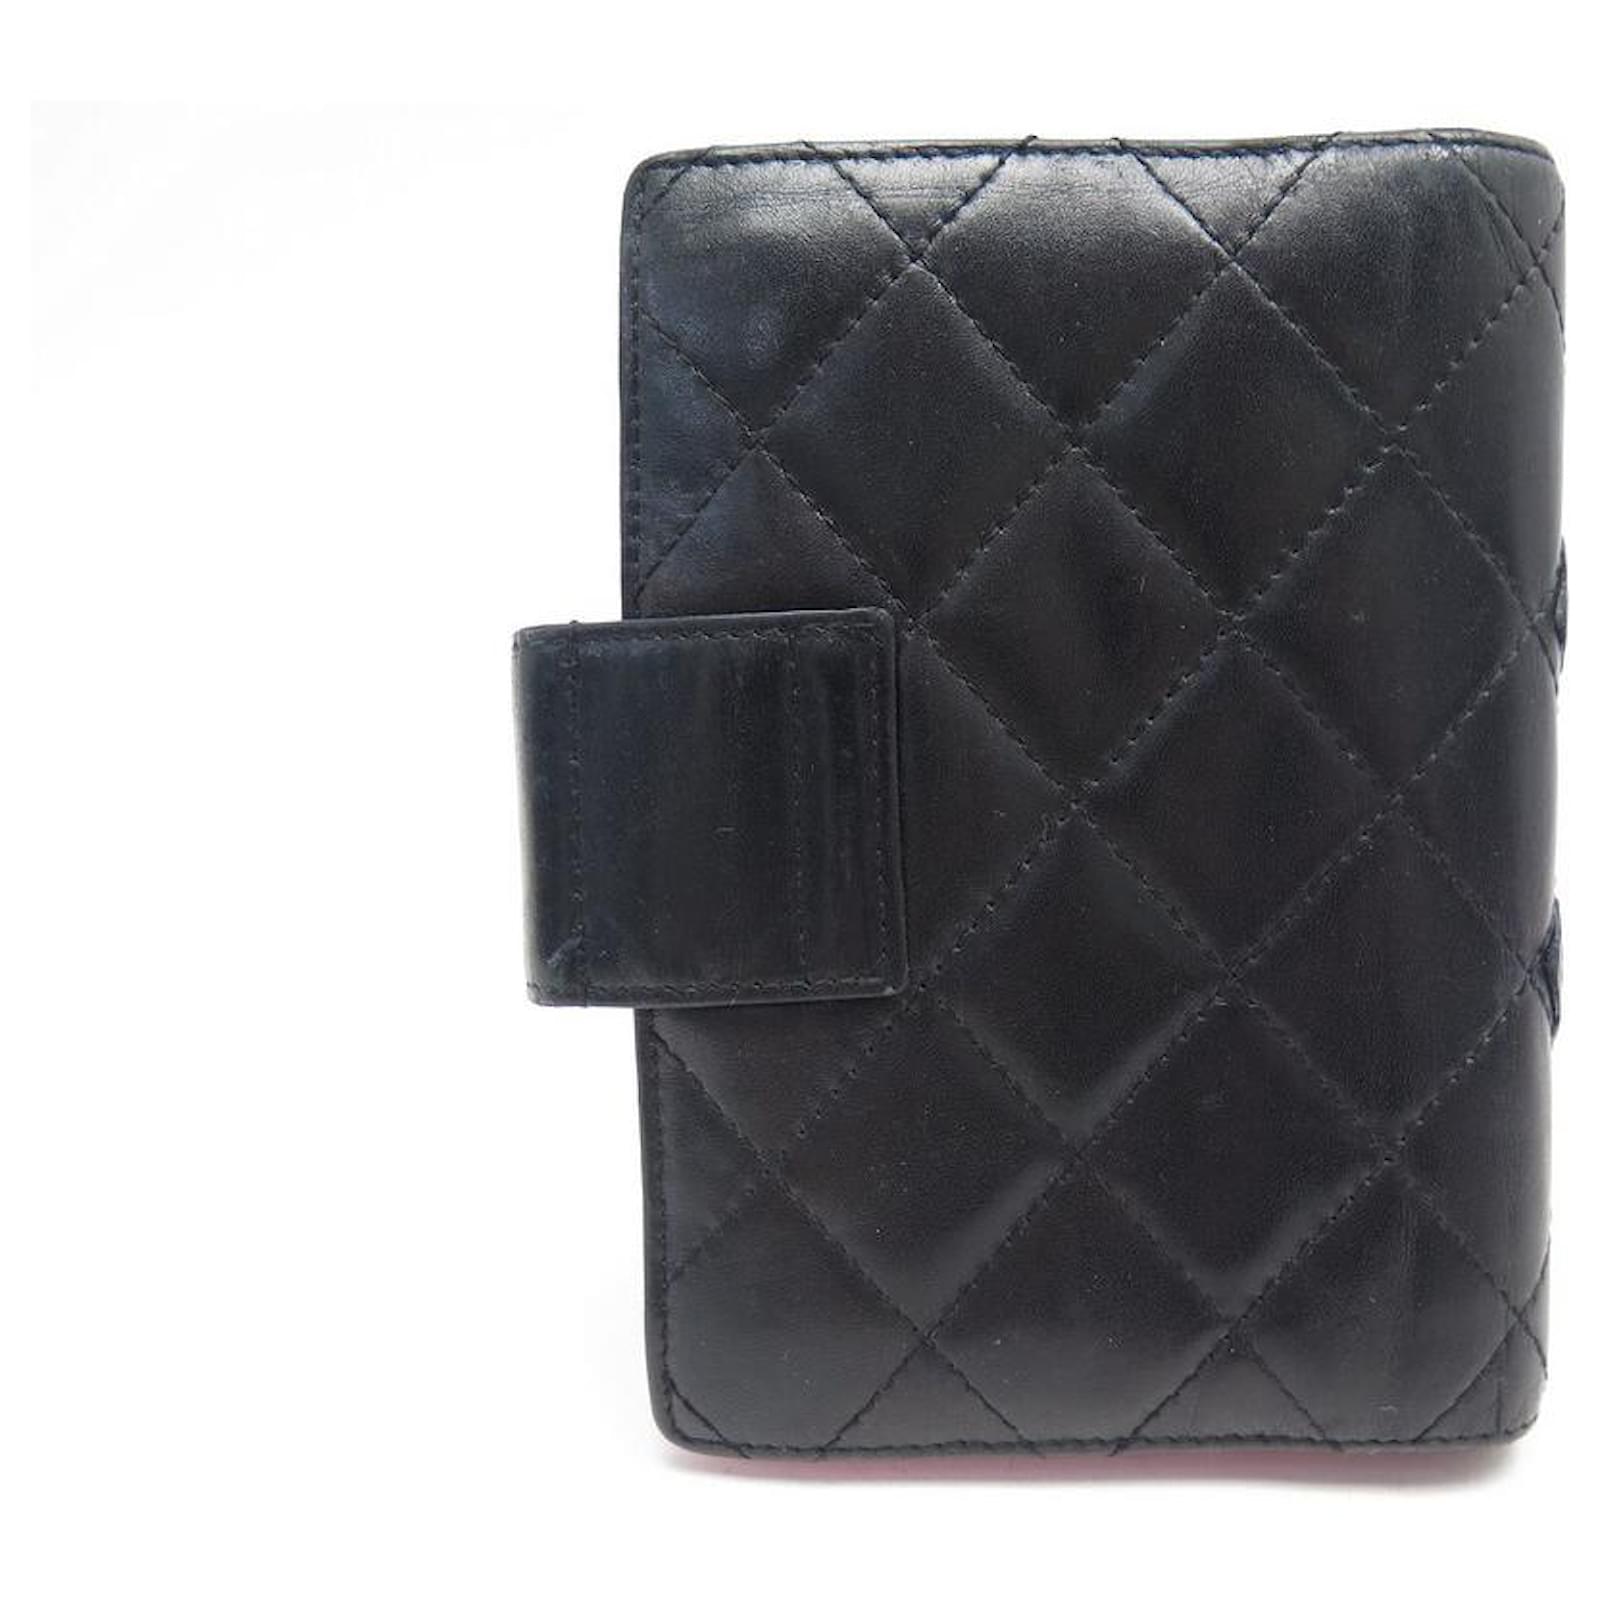 CHANEL CAMBON AGENDA COVER IN BLACK MATTRESS LEATHER LEATHER DIARY COVER